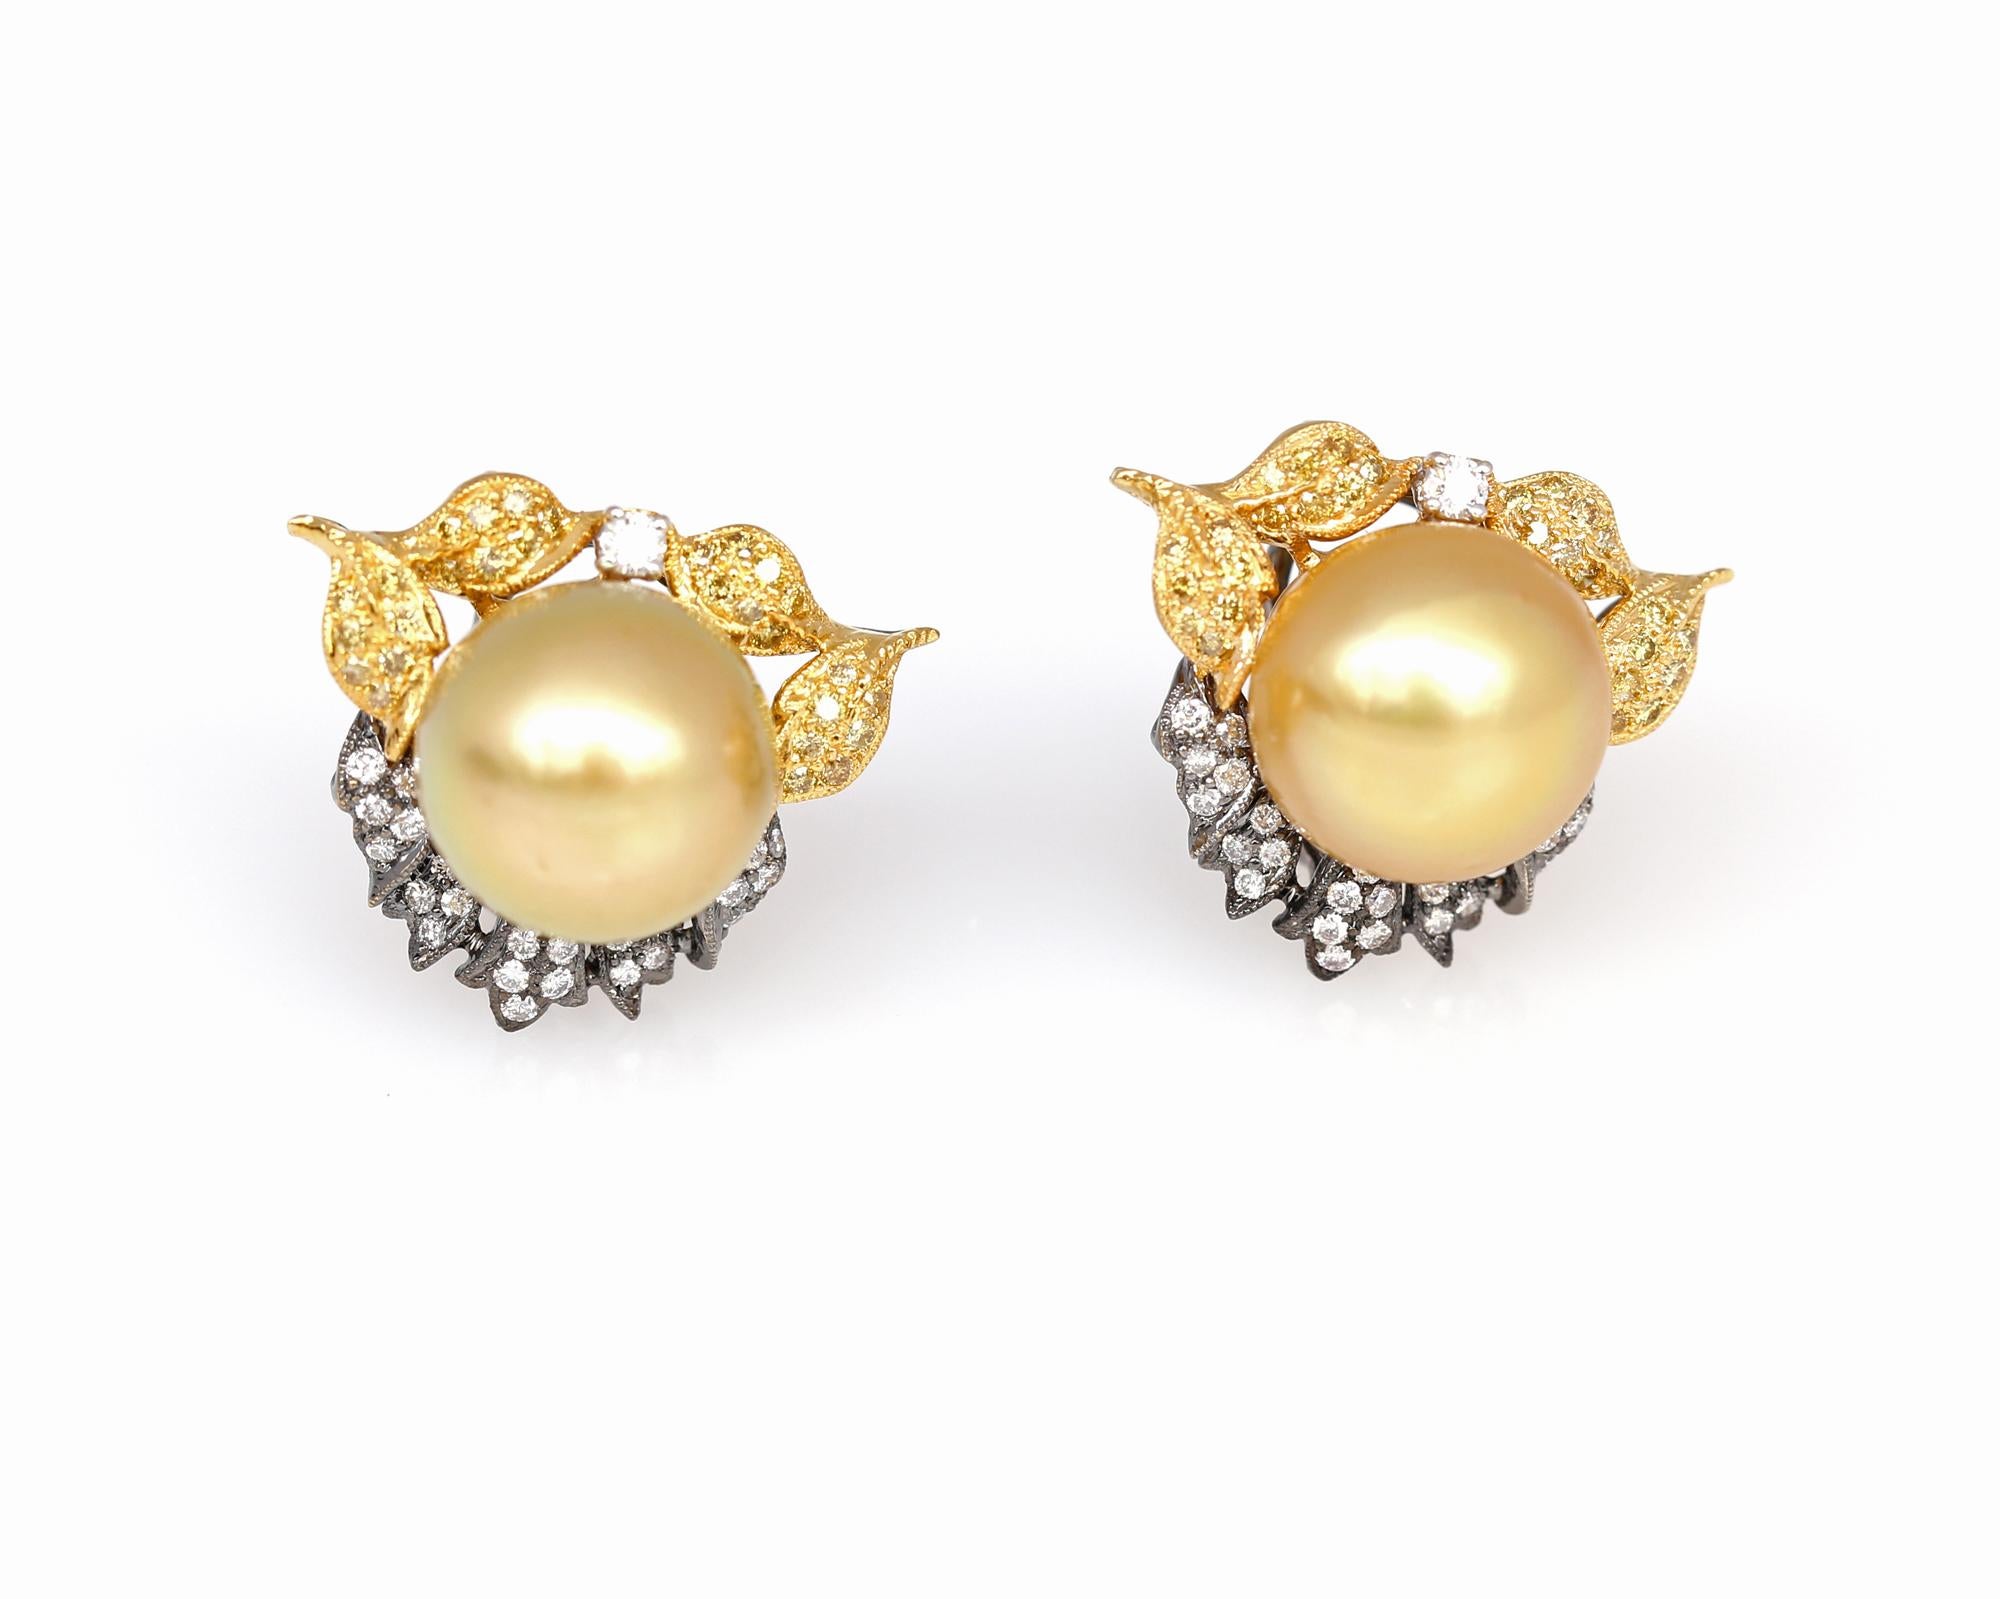 Round Cut South Sea Pearls Earrings 15 mm Diamonds Yellow Black Gold, 1990